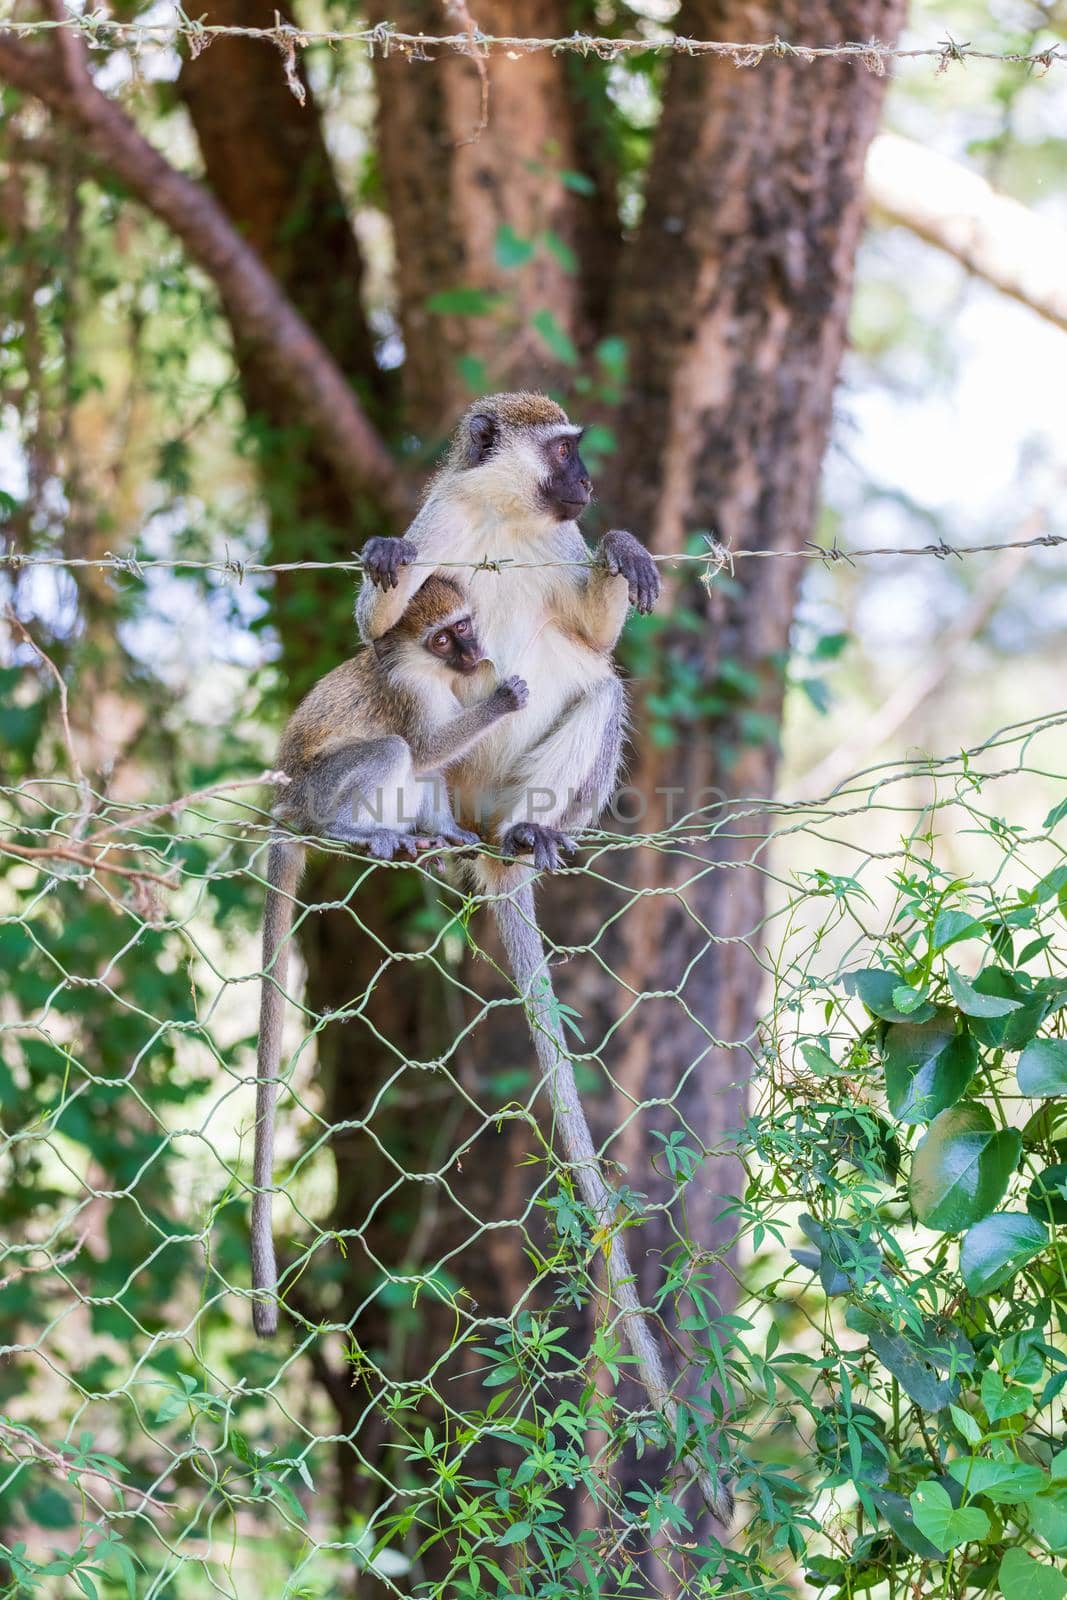 cute Vervet monkey with baby hung on a wire fence in Lake Chamo national park, Arba Minch, Ethiopia wildlife